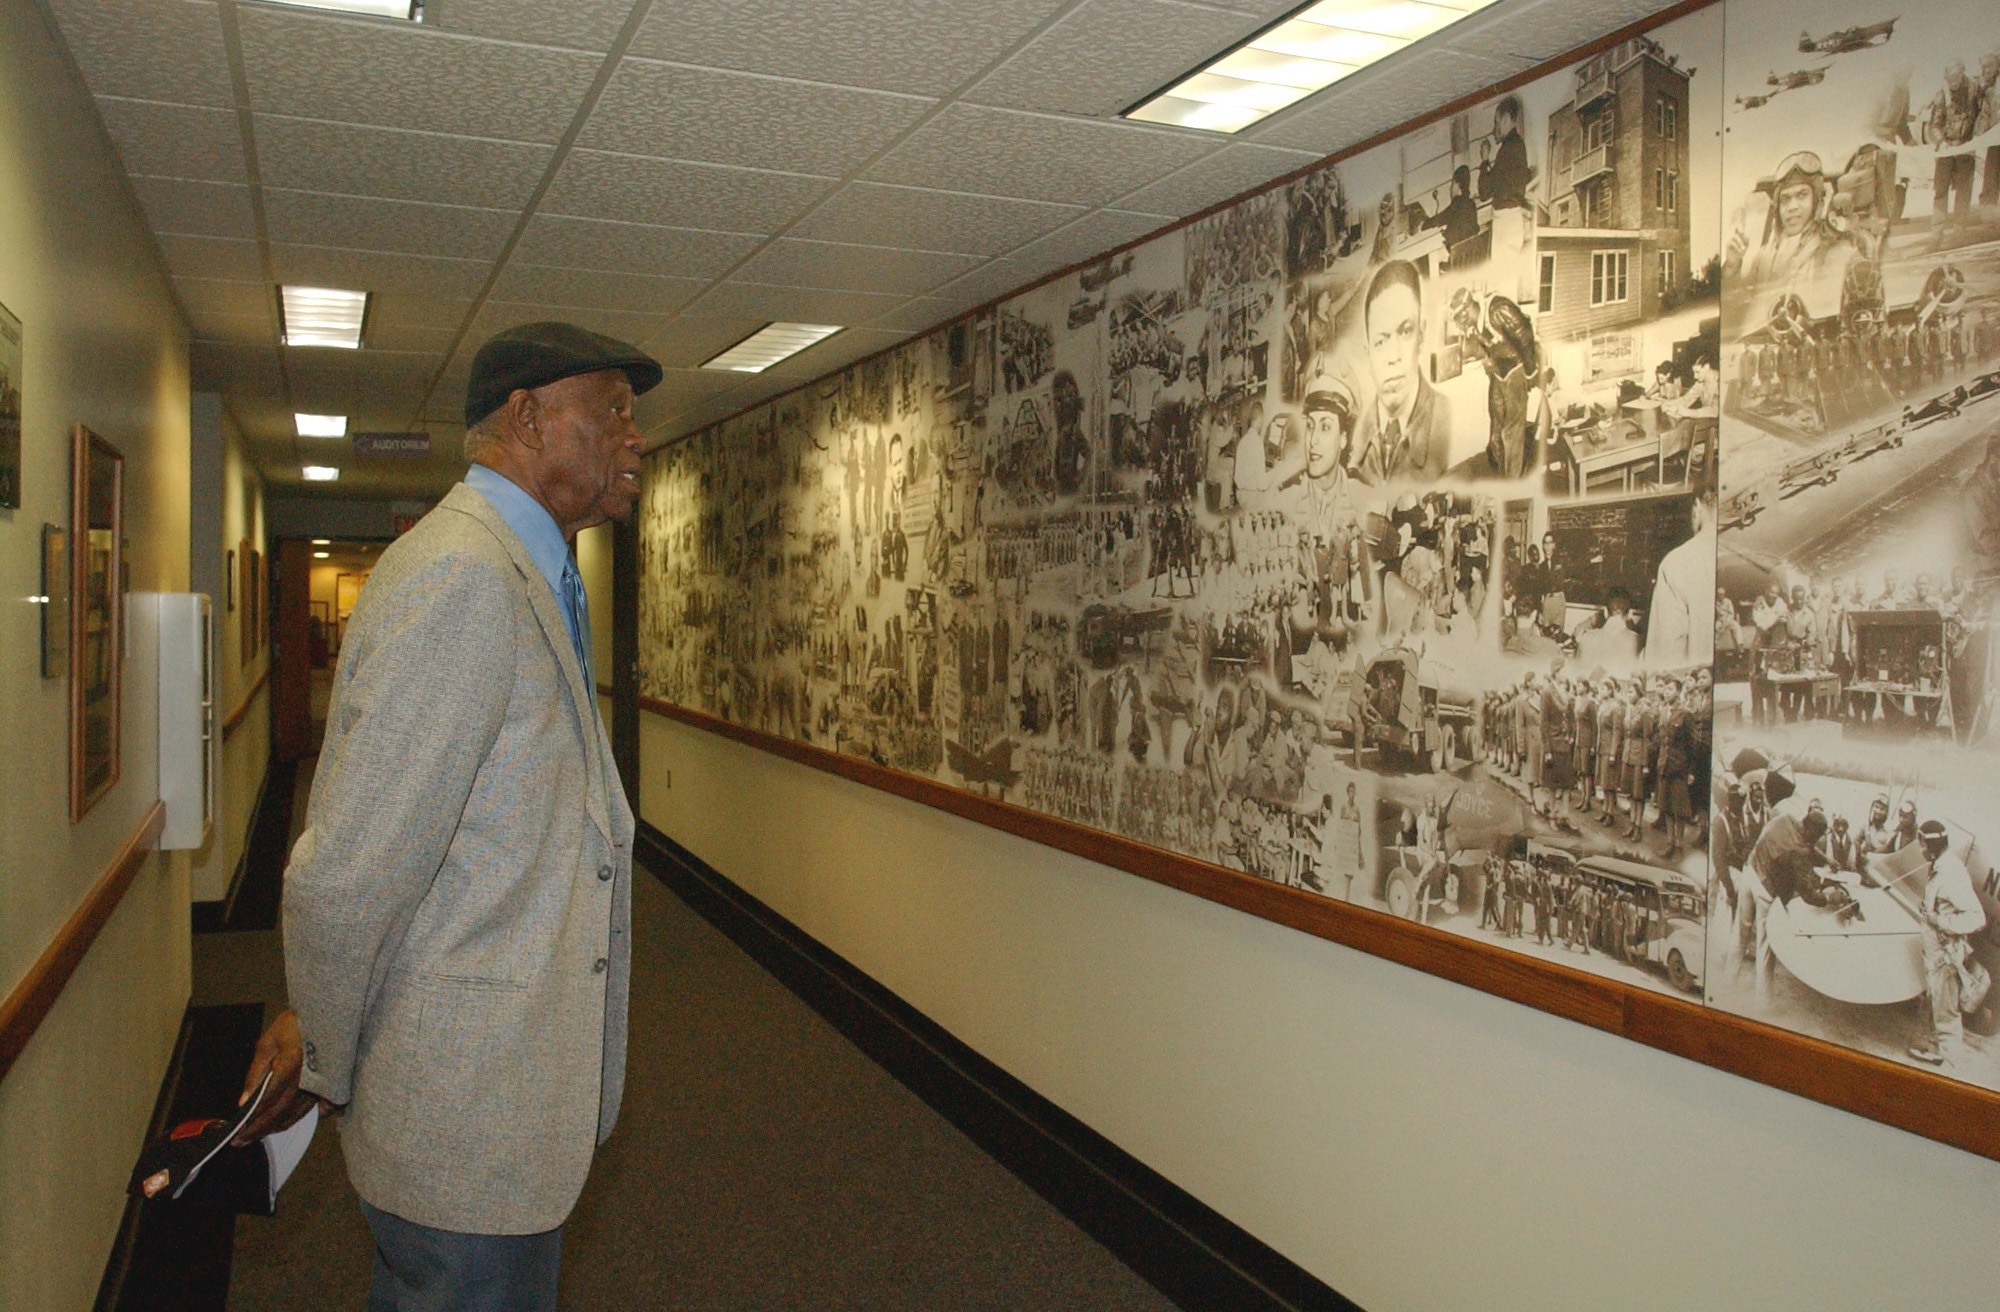 RANDOLPH AIR FORCE BASE, Texas (AFPN) -- John Miles looks at the Tuskegee Airmen heritage wall at the 99th Flying Training Squadron. He recently visited the unit he was assigned to in the 1940s. (U.S. Air Force photo by Staff Sgt. Lindsey Maurice) 

